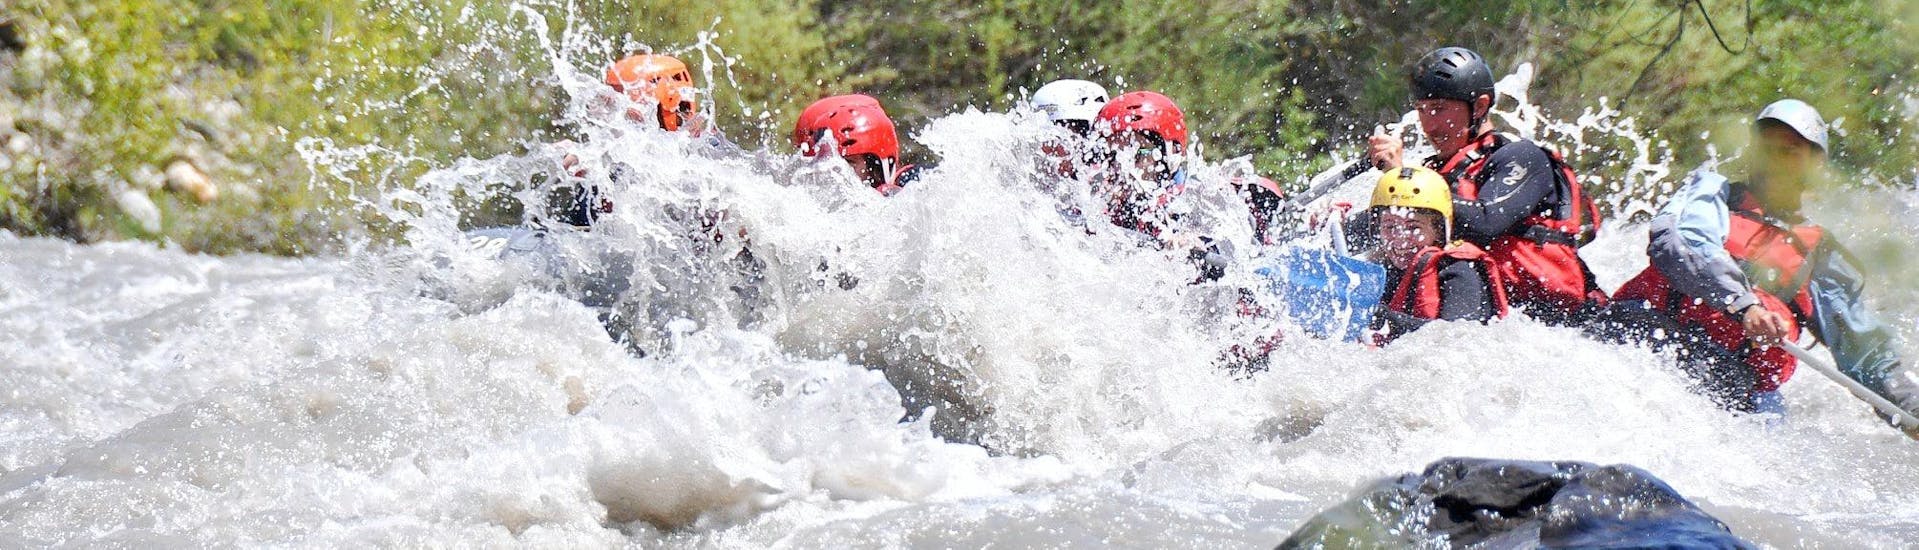 Participants in the Adventurous Rafting Combo on the Ubaye River with Anaconda Rafting are caught in heavy rapids.